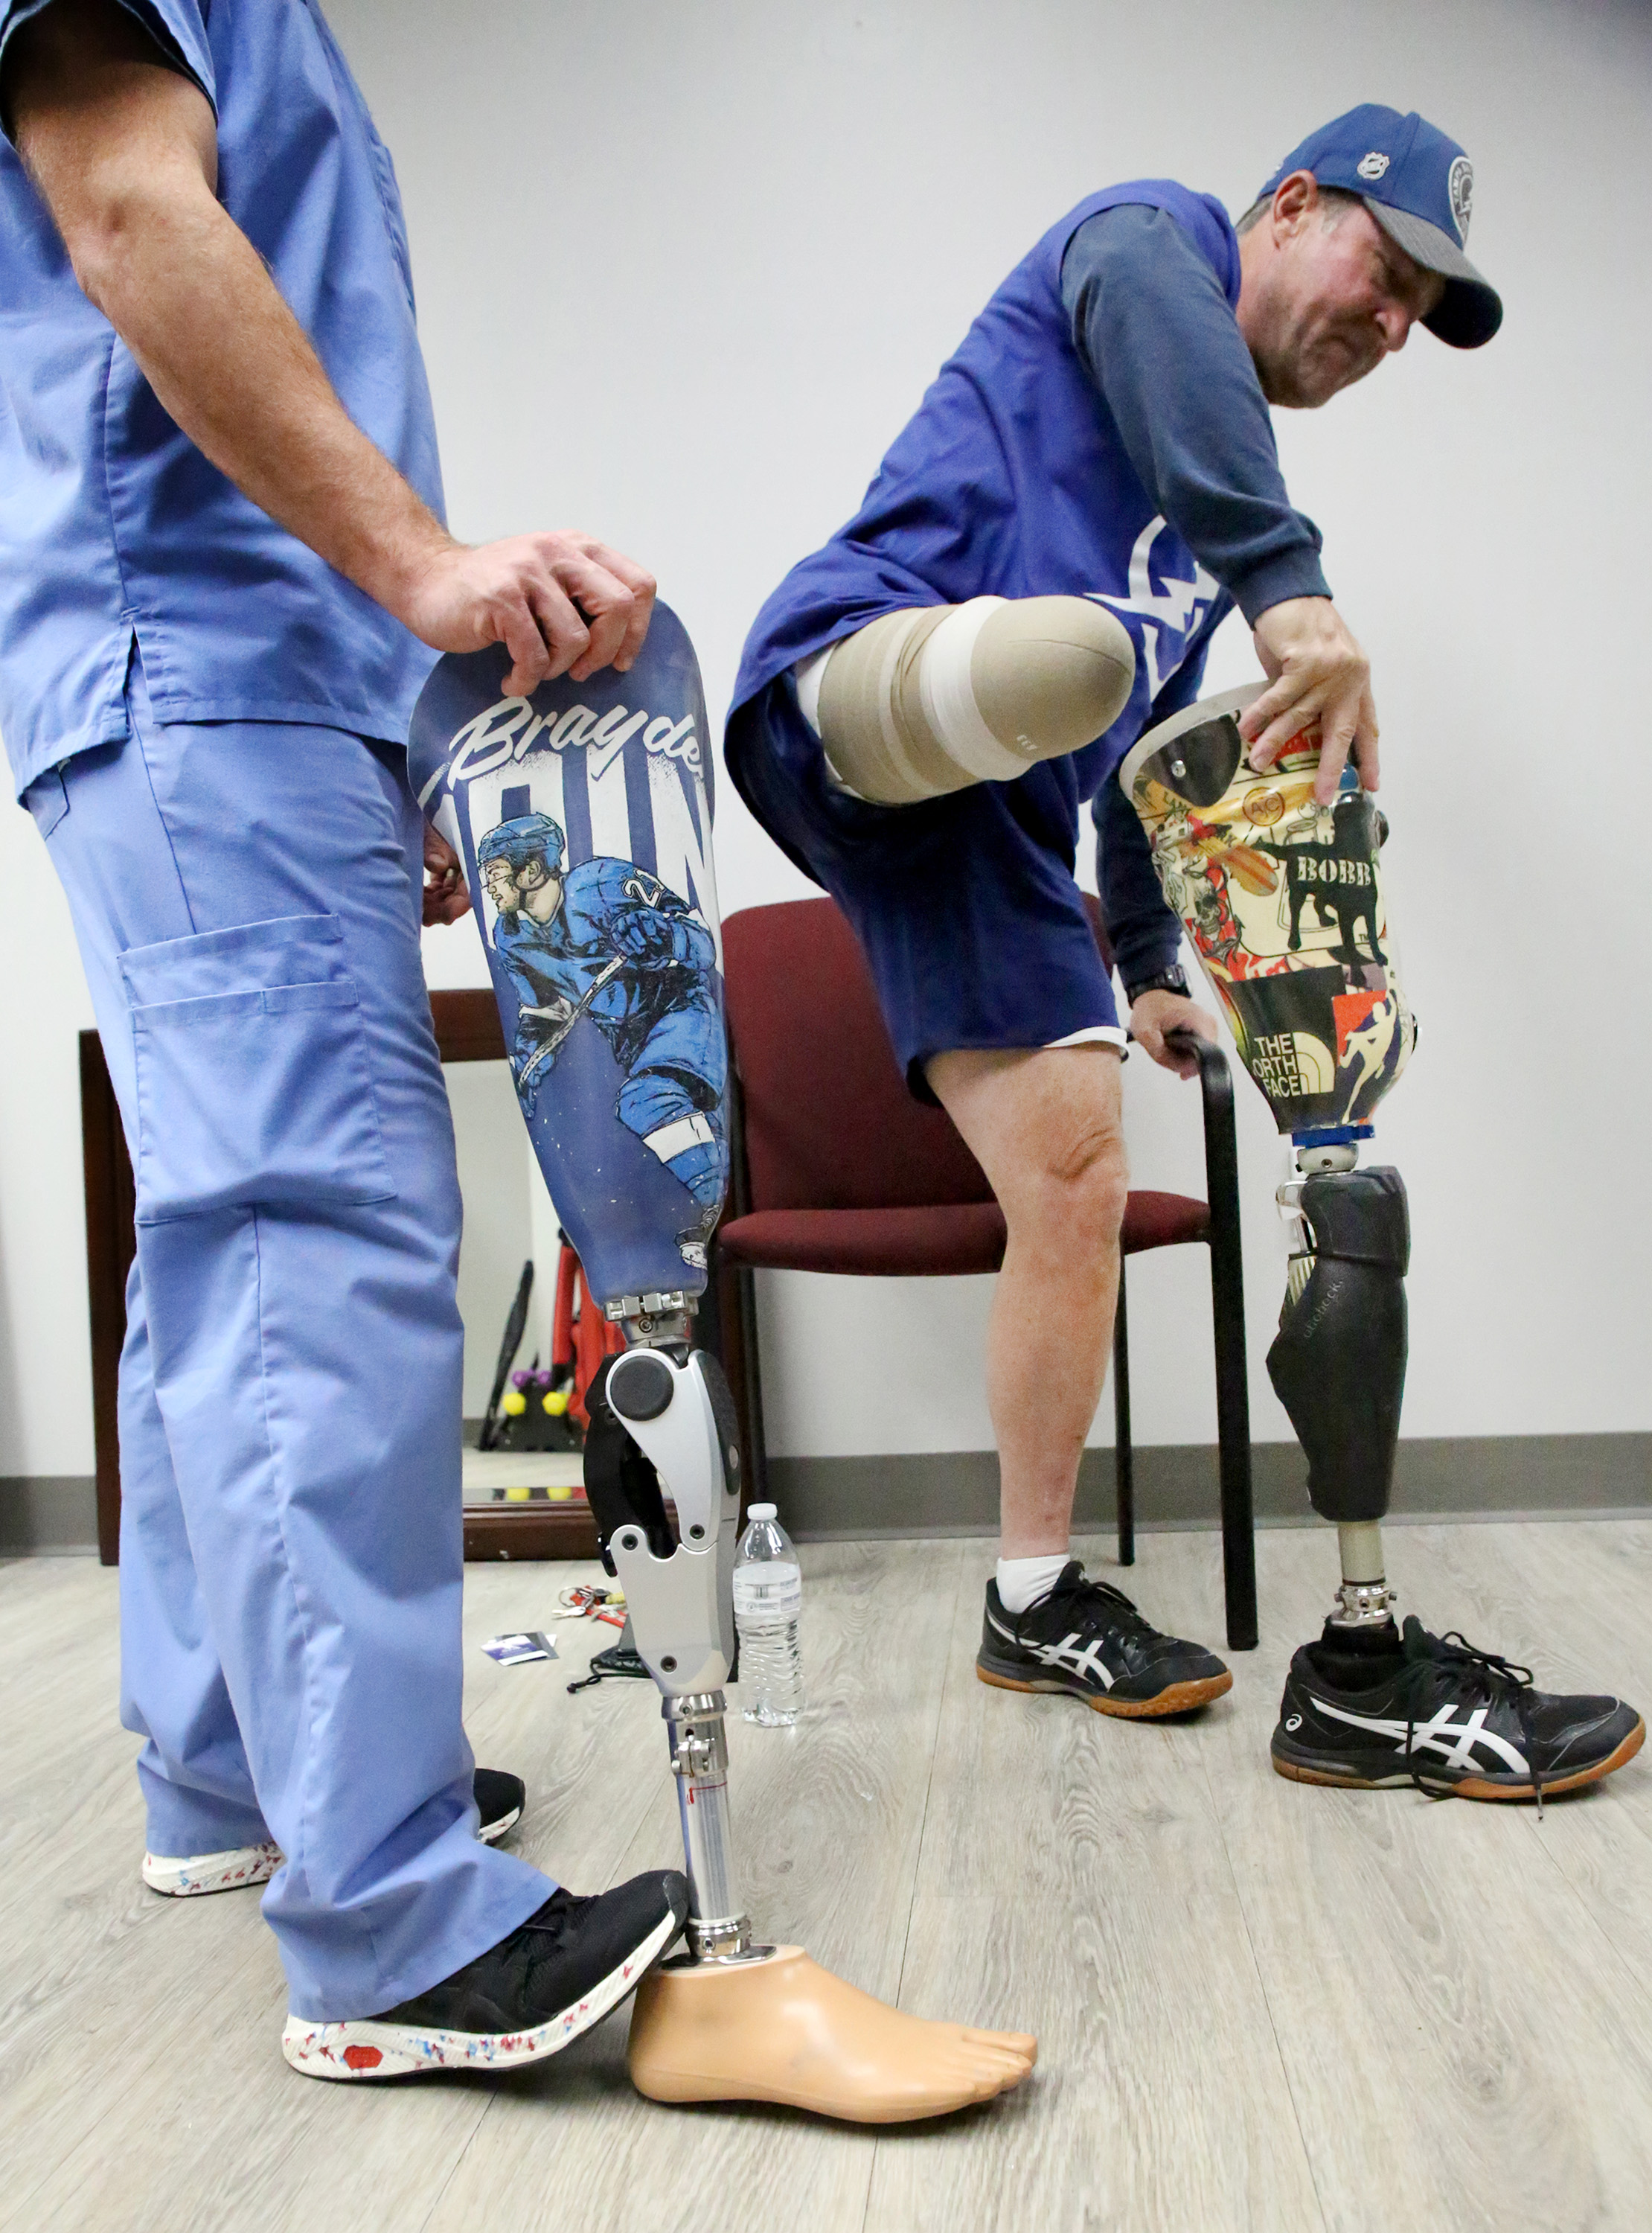 Student gives prosthesis project a Lightning-themed touch